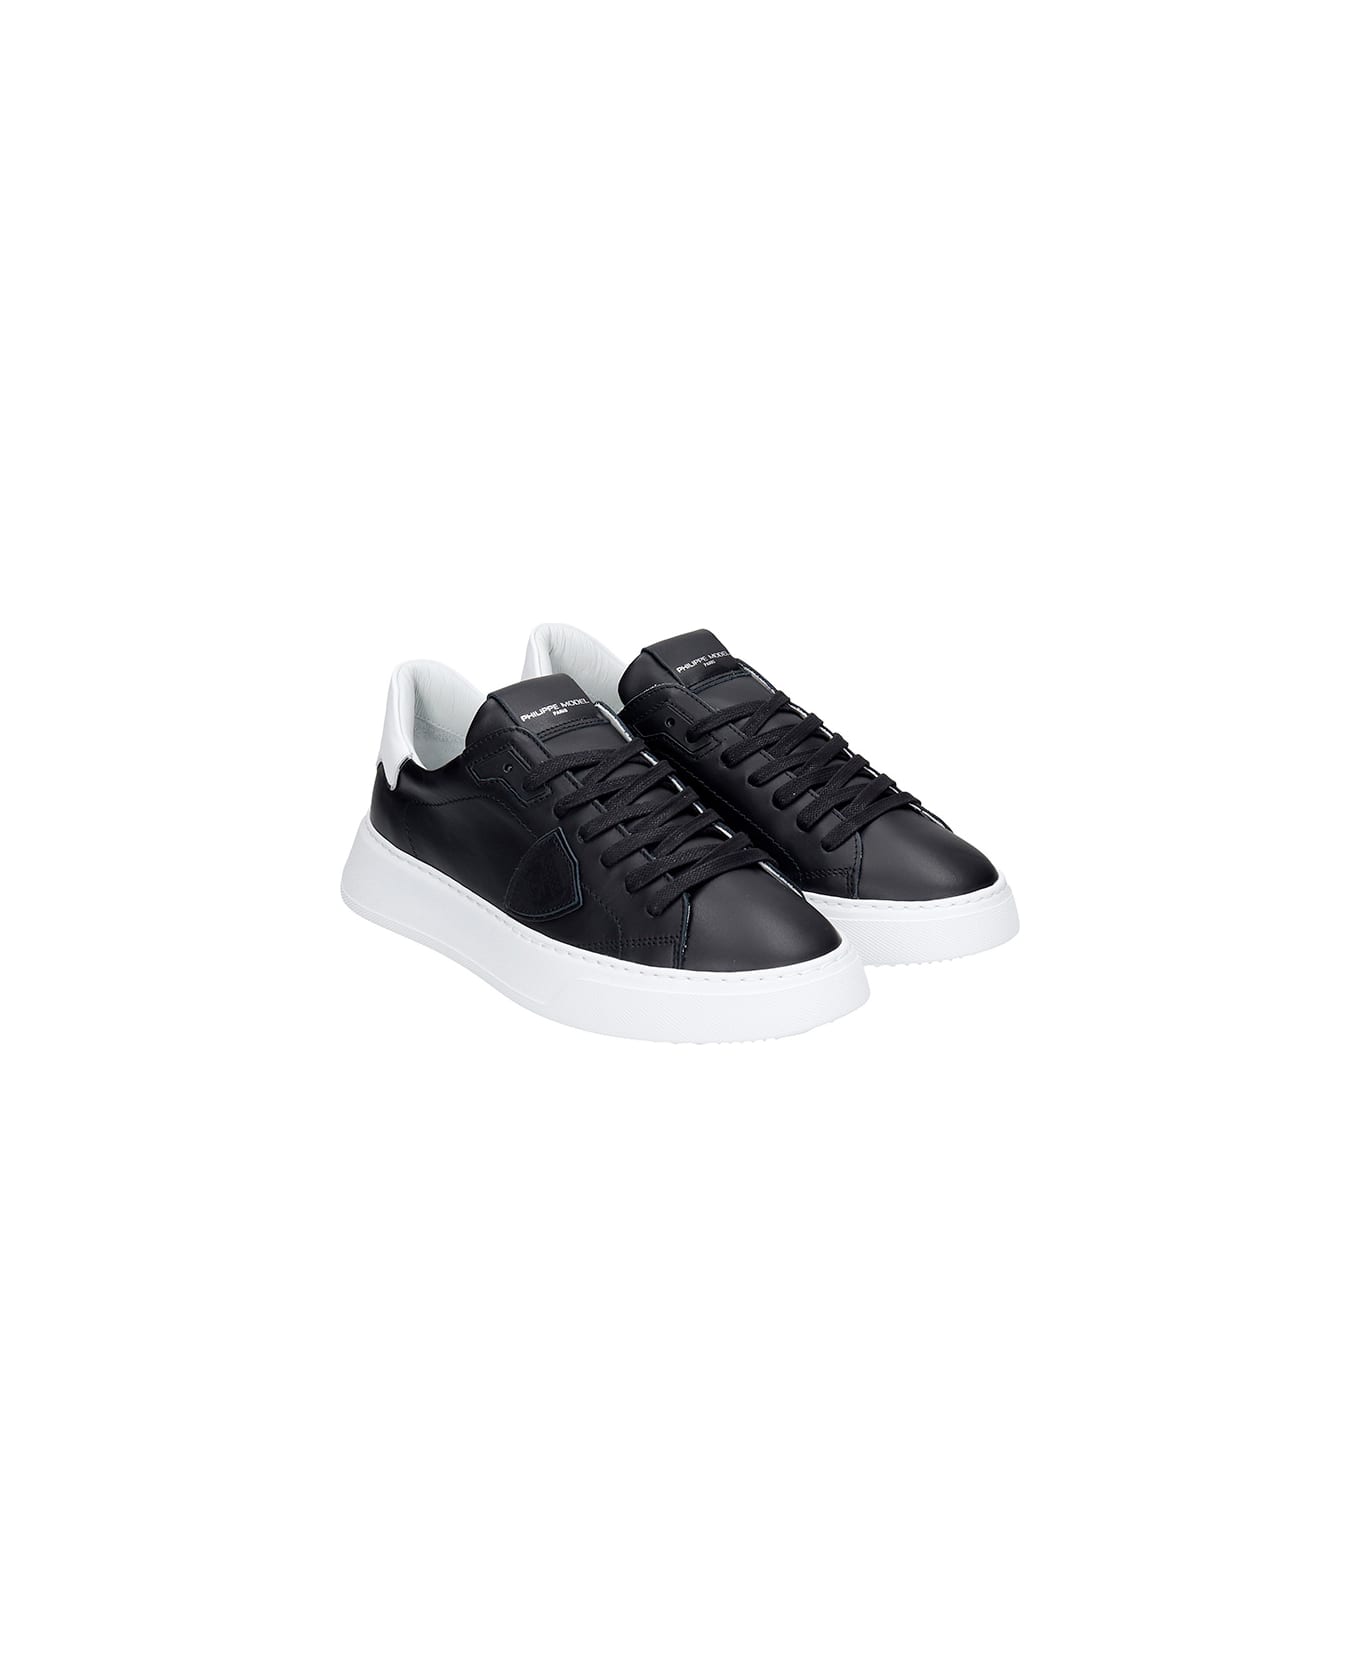 Philippe Model Temple L Sneakers In Black Leather - Black